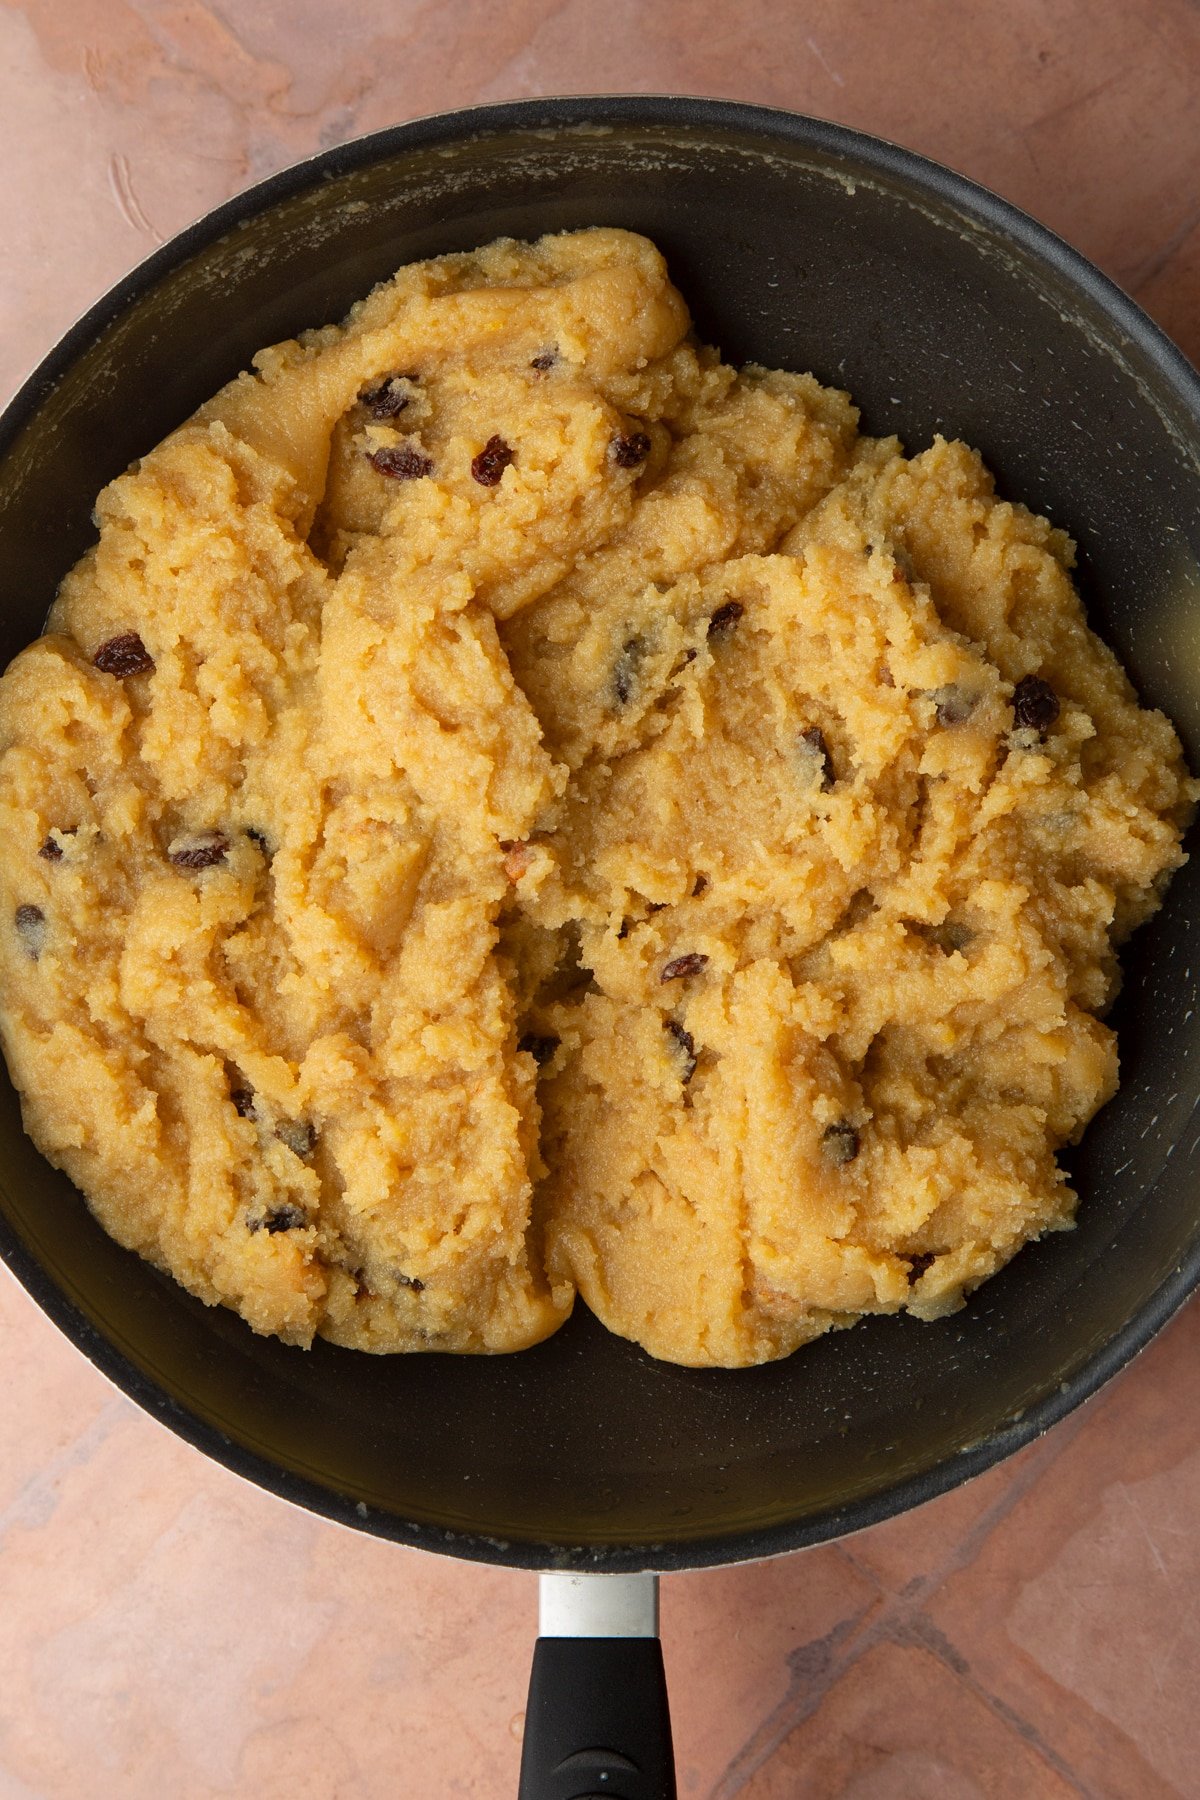 Golden semolina cake batter cooked until thick in a pan.